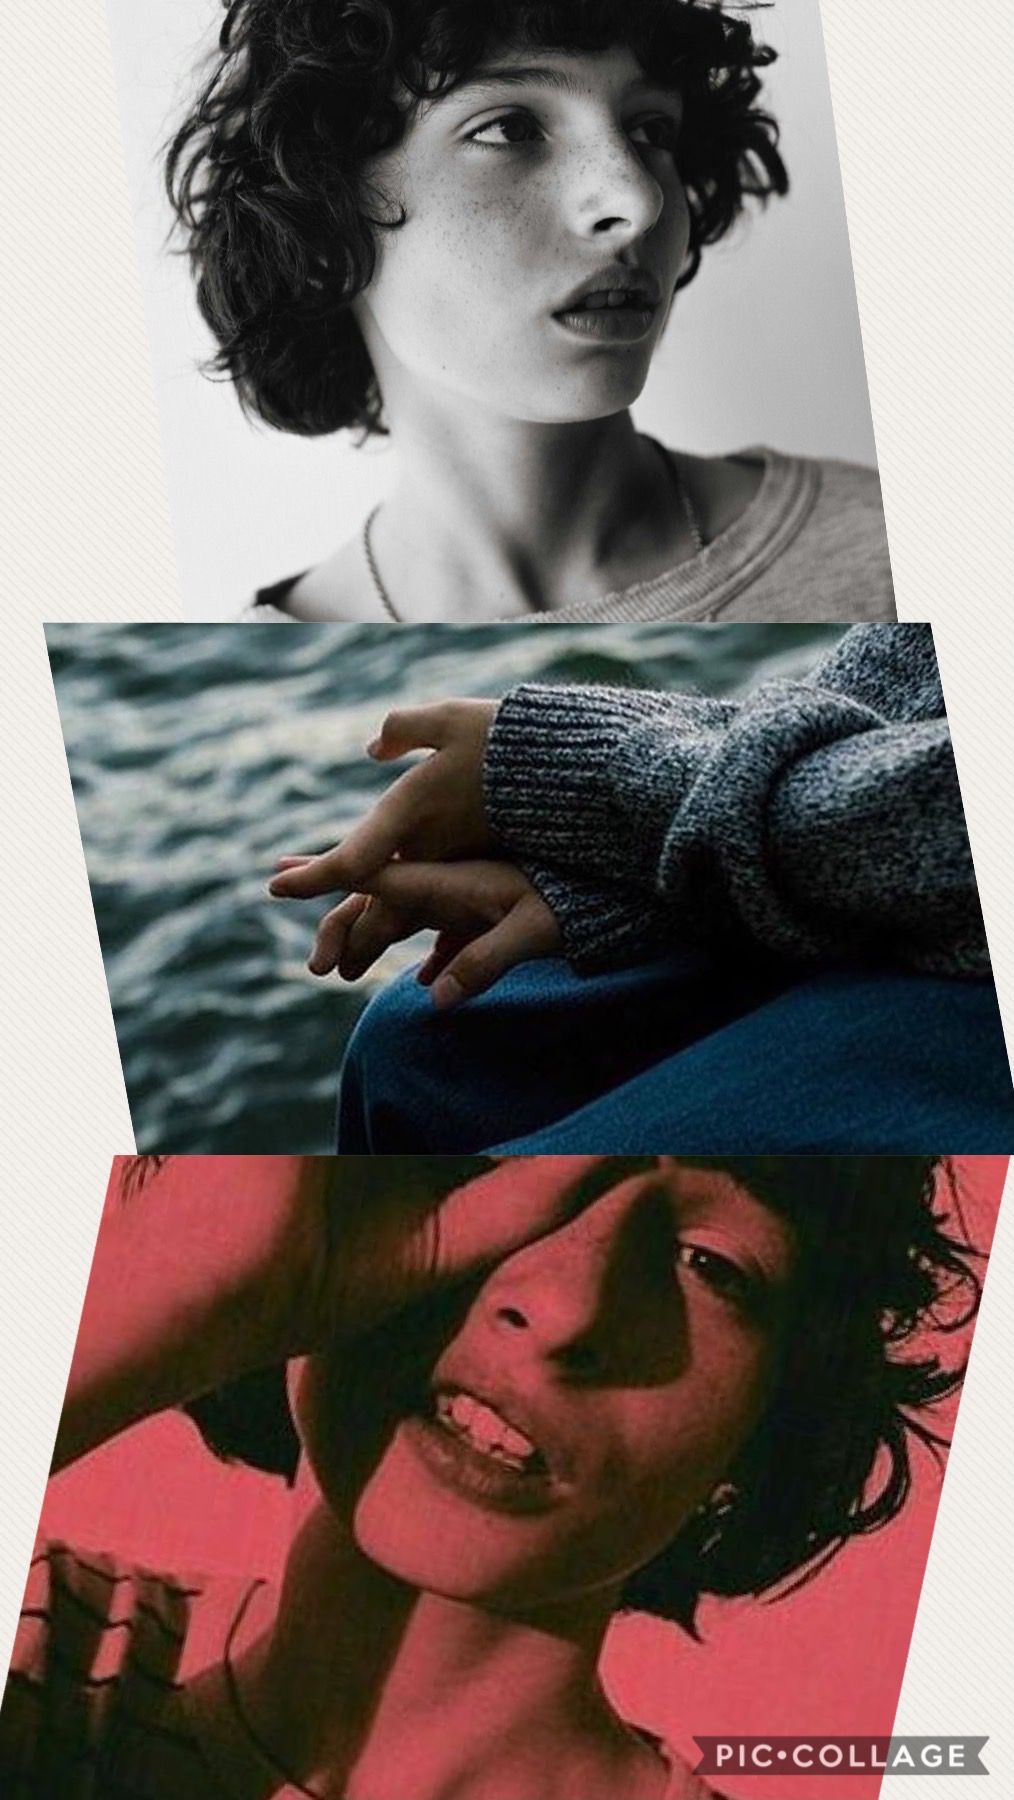 Finn Wolfhard IPhone Home Lock Screen Wallpaper. ( My Edit If You Use Please Repin, And Give Credit! )